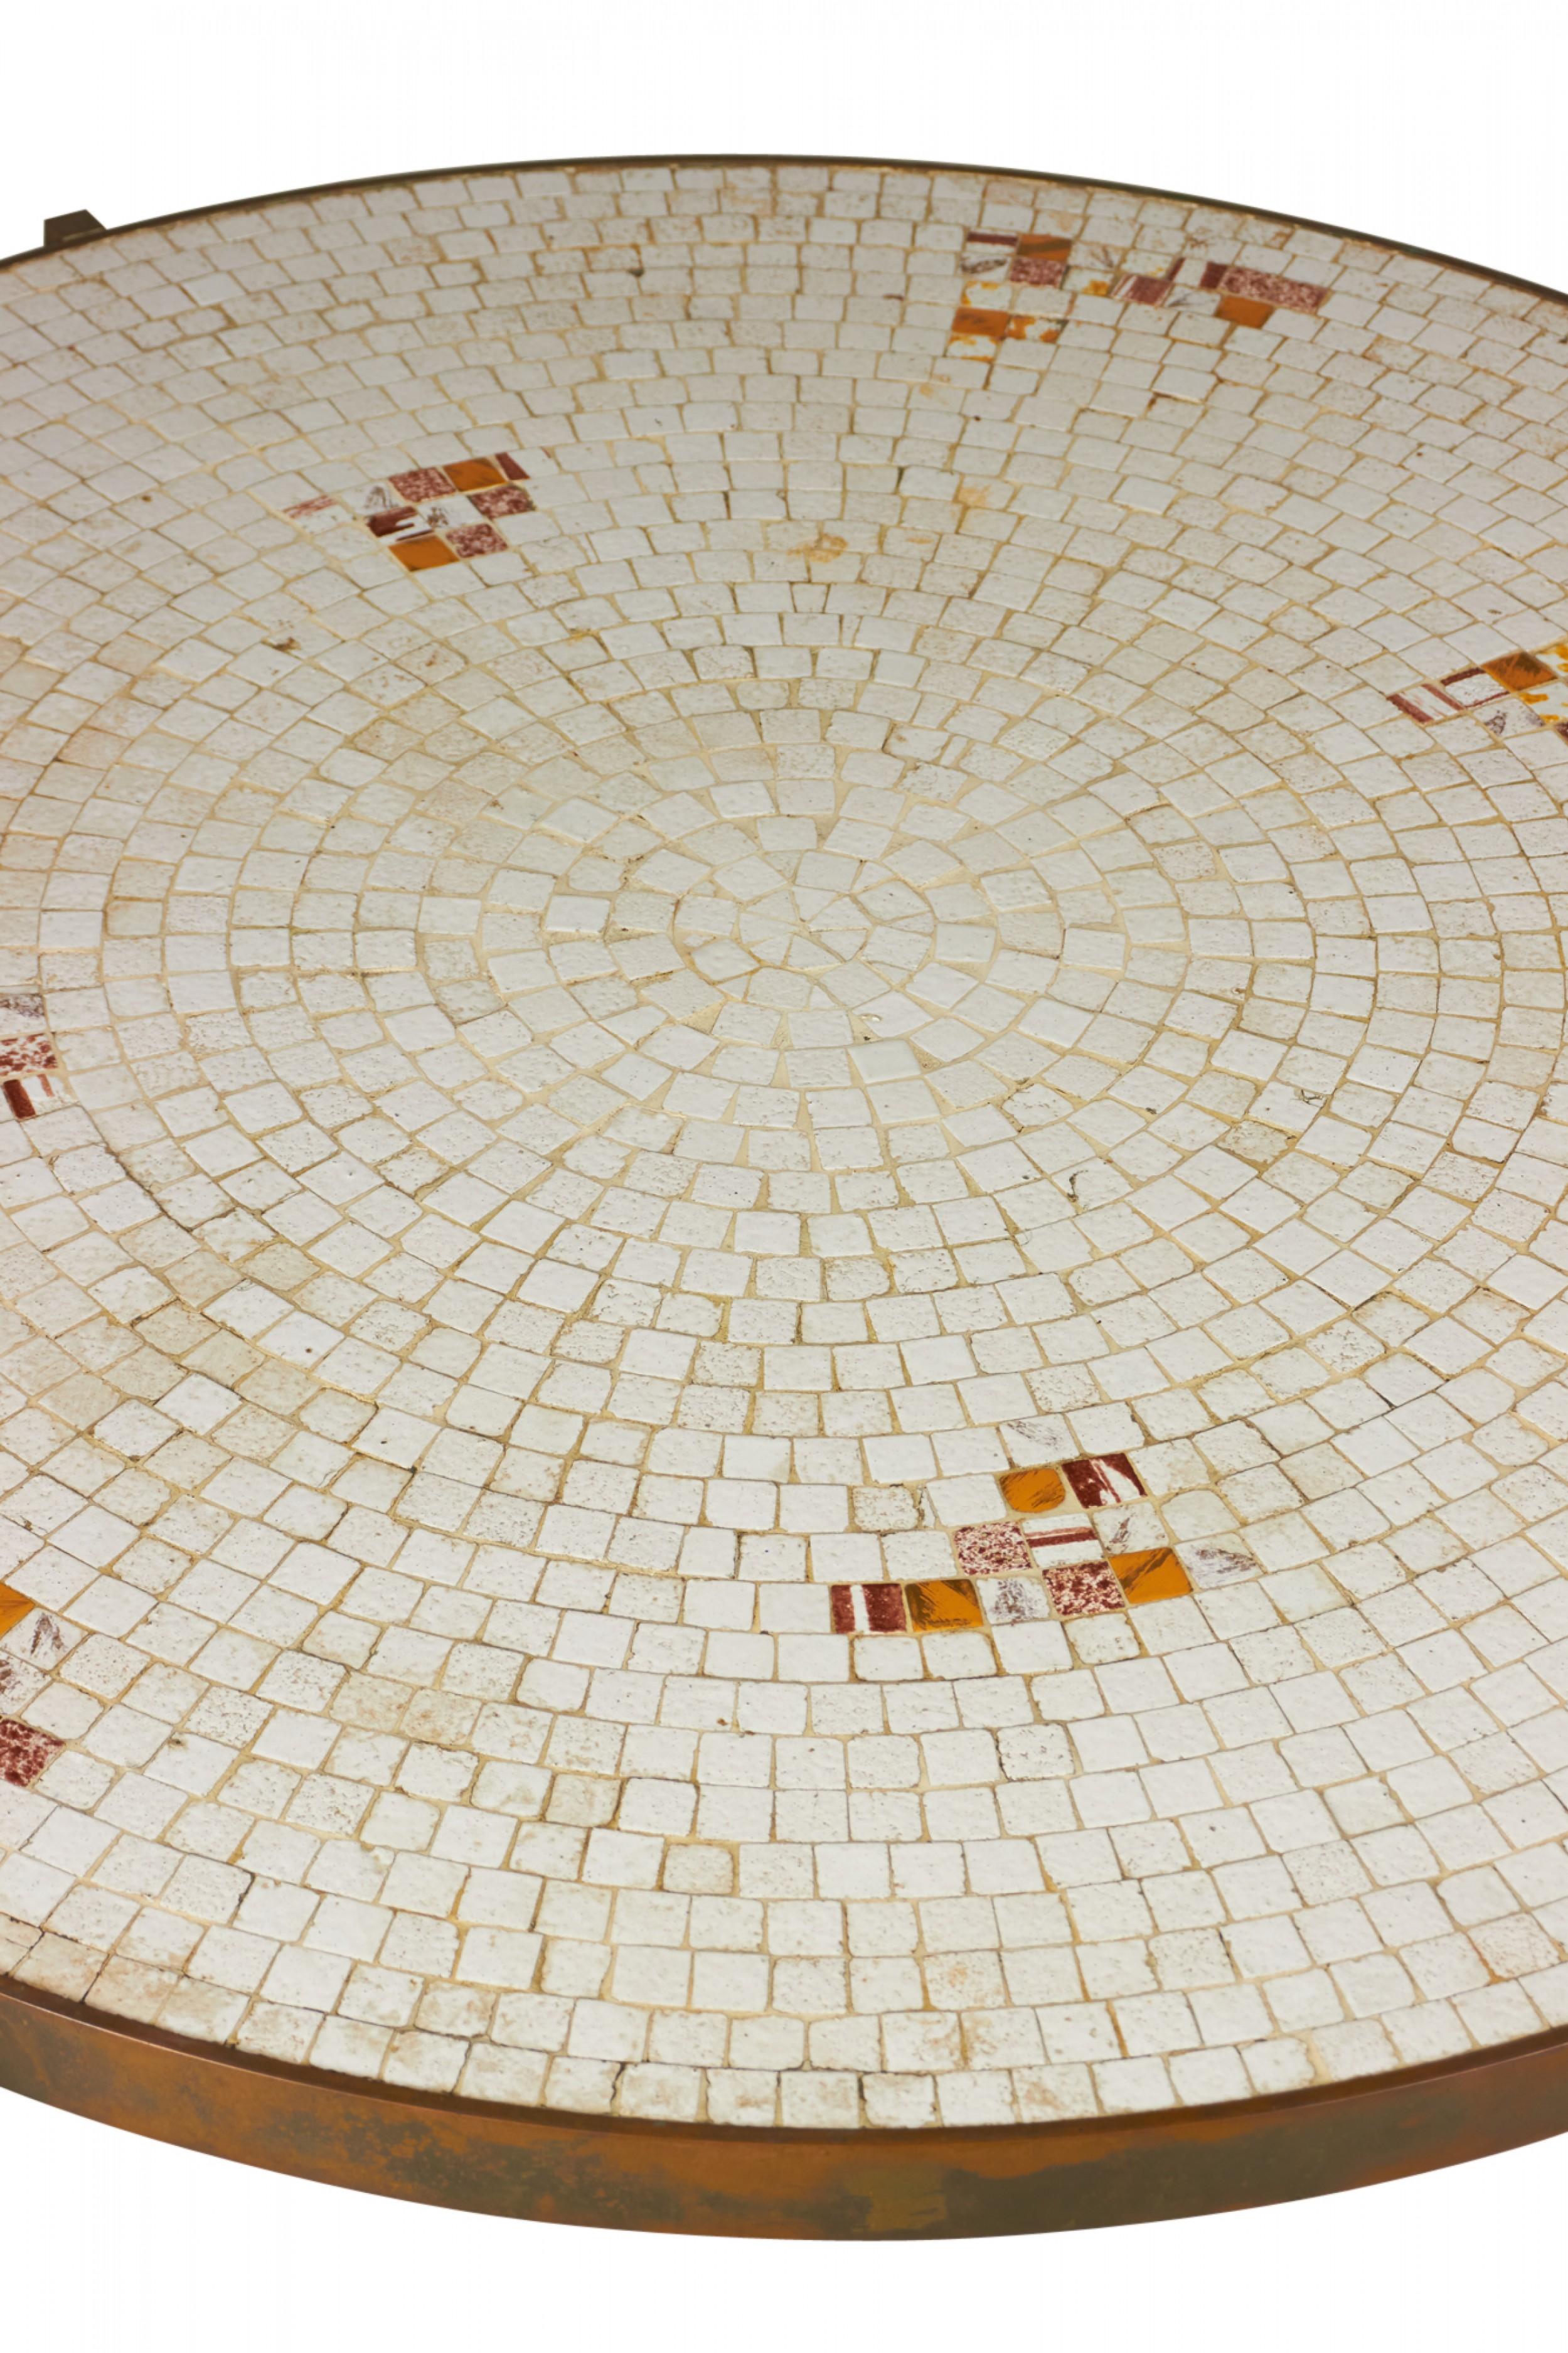 Beige and Orange Mosaic Tile Top Circular Coffee Table In Good Condition For Sale In New York, NY